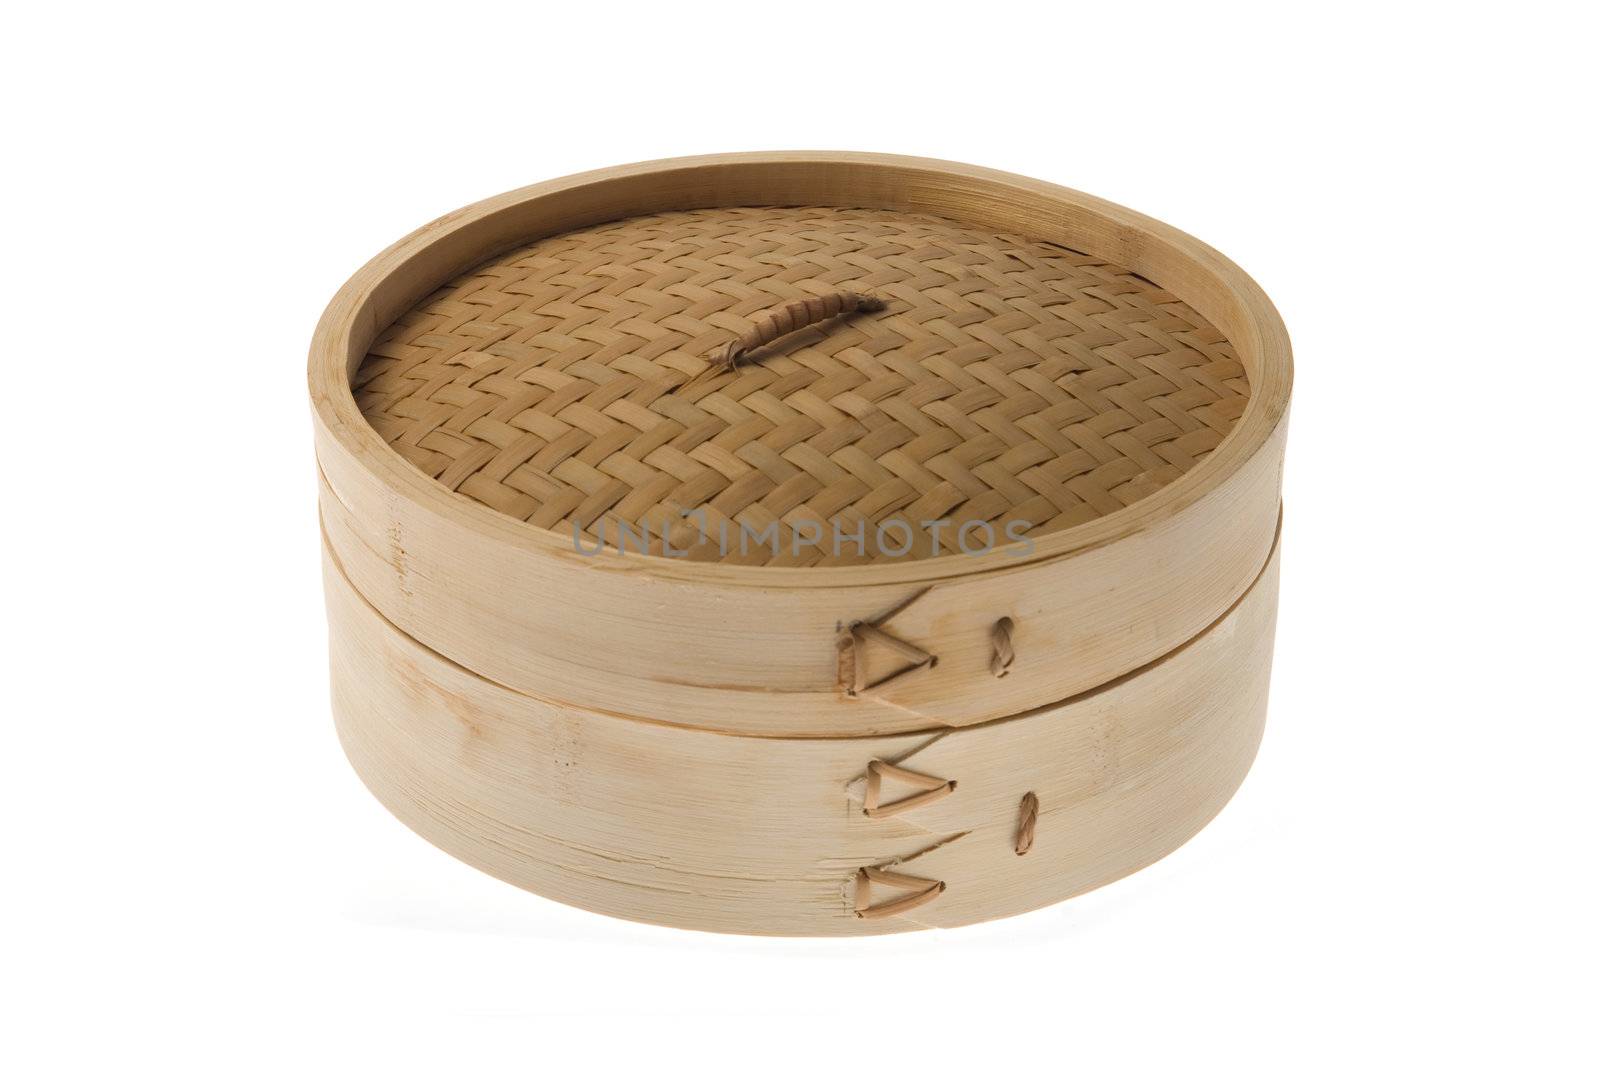 Bamboo steamer isolated over a white background.